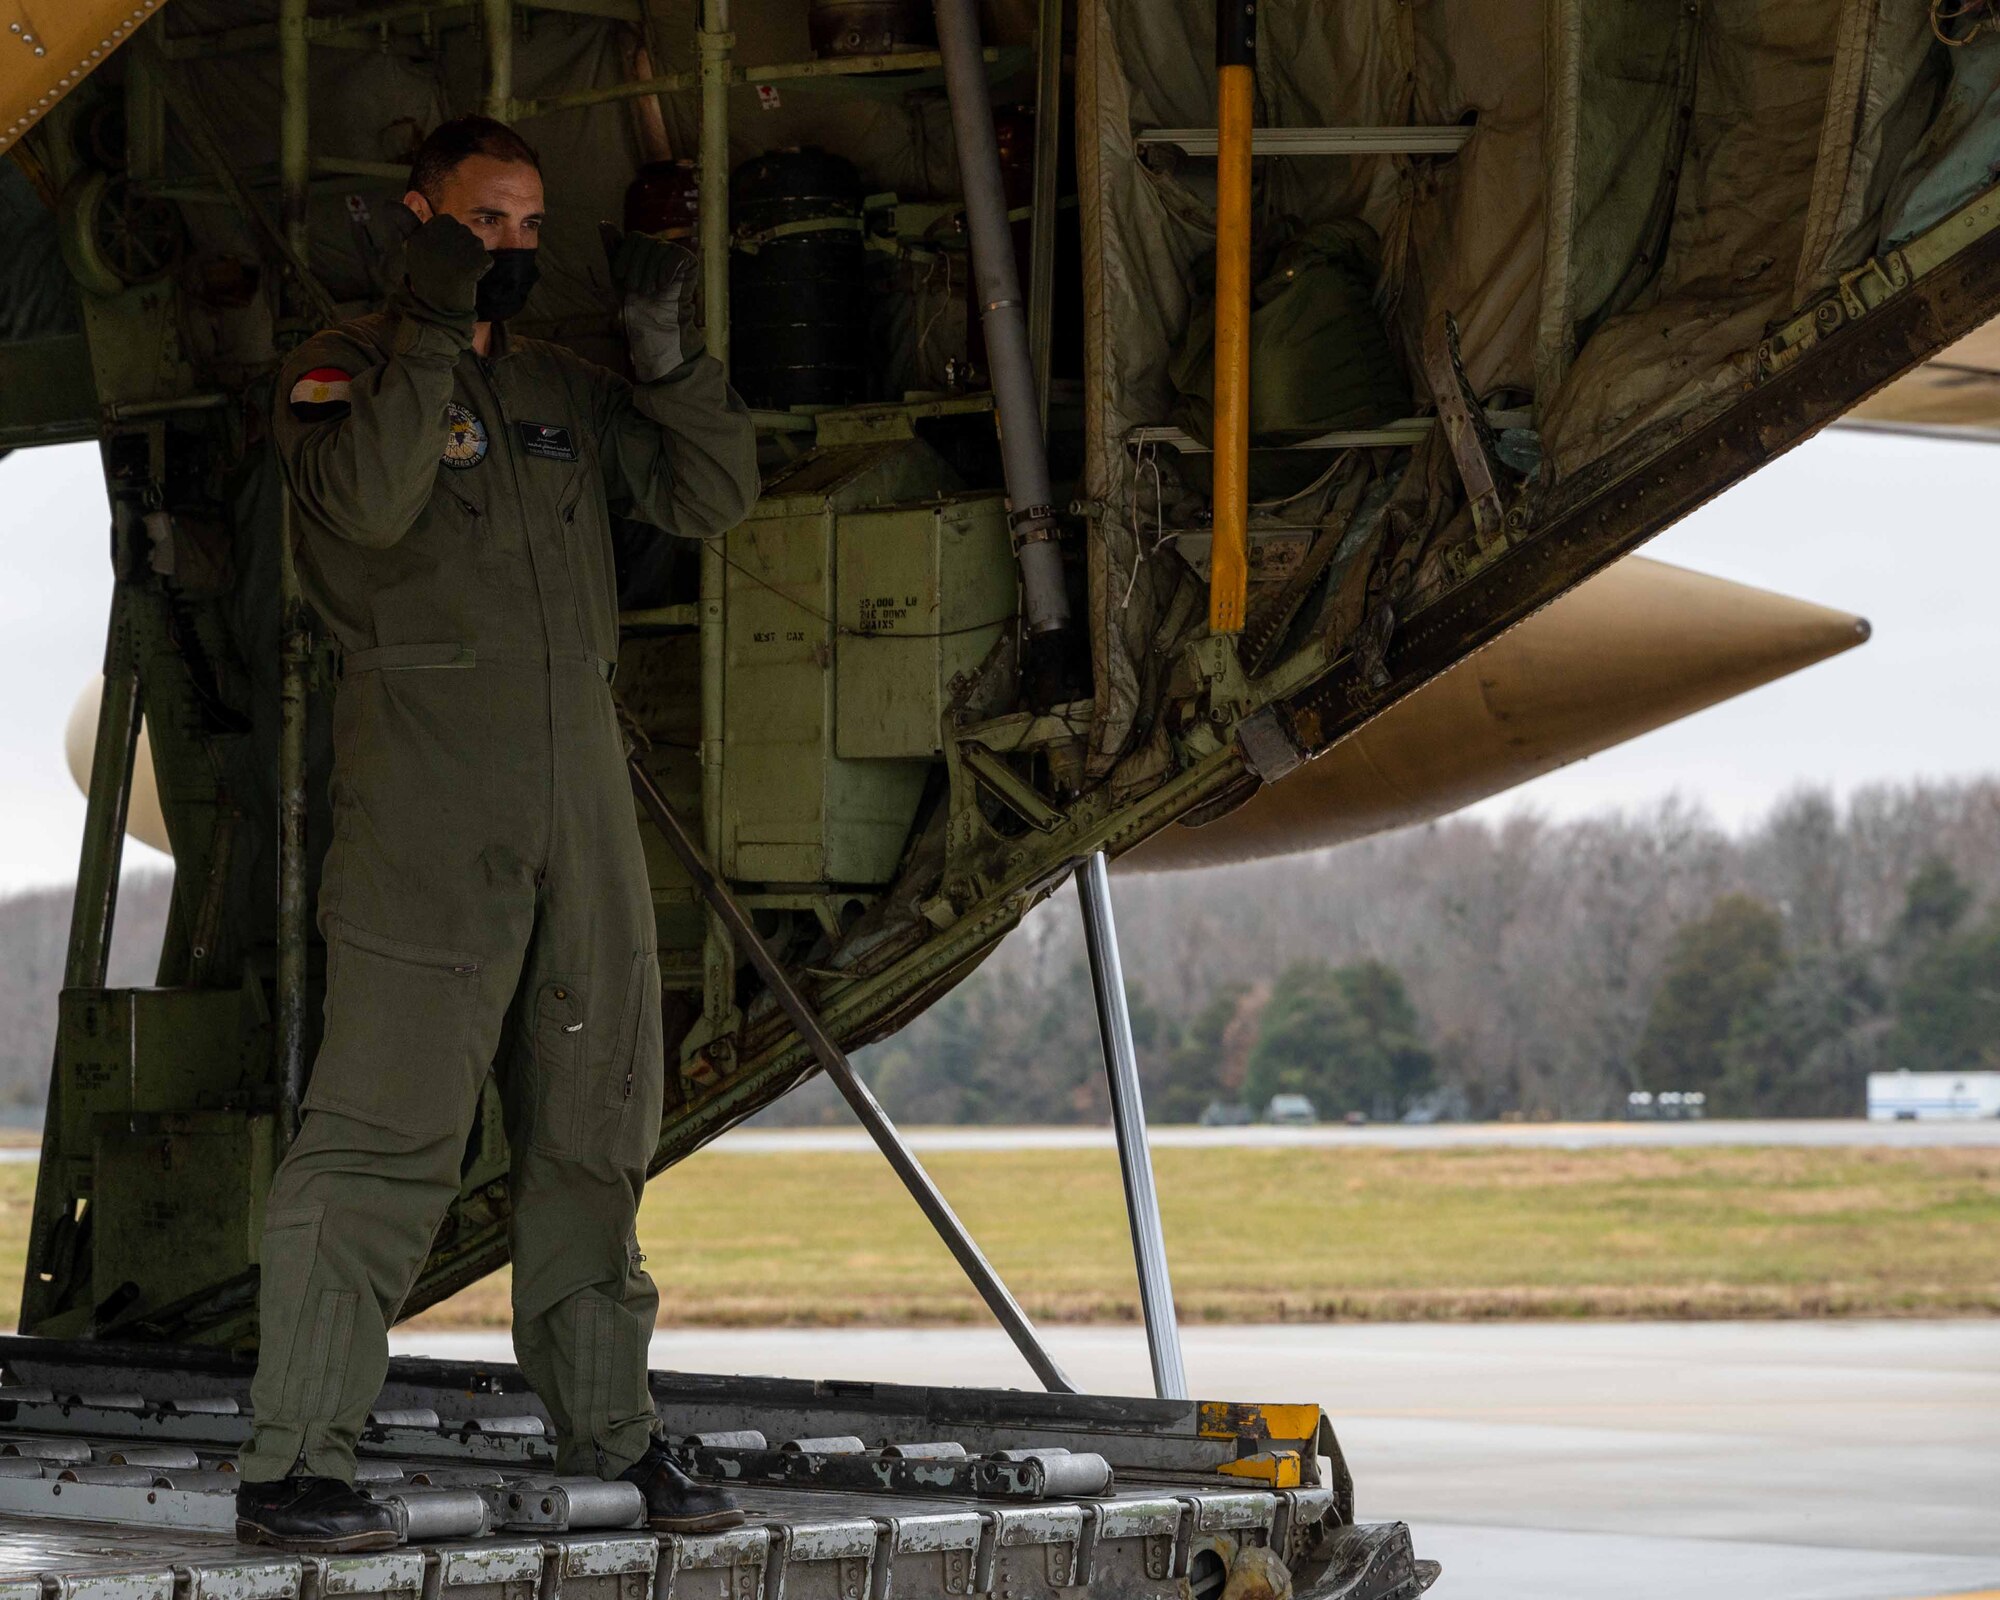 An Egyptian Air Force member marshals a K- loader to the ramp of an Egyptian Air Force C-130 Hercules during a foreign military sales mission at Dover Air Force, Delaware, Dec. 11, 2021. The United States and Egypt share a strong partnership based on mutual interest in Middle East peace and stability, economic opportunity and regional security. Due to its strategic location, Dover AFB supports approximately $3.5 billion worth of foreign military sales annually. (U.S. Air Force photo by Senior Airman Faith Schaefer)